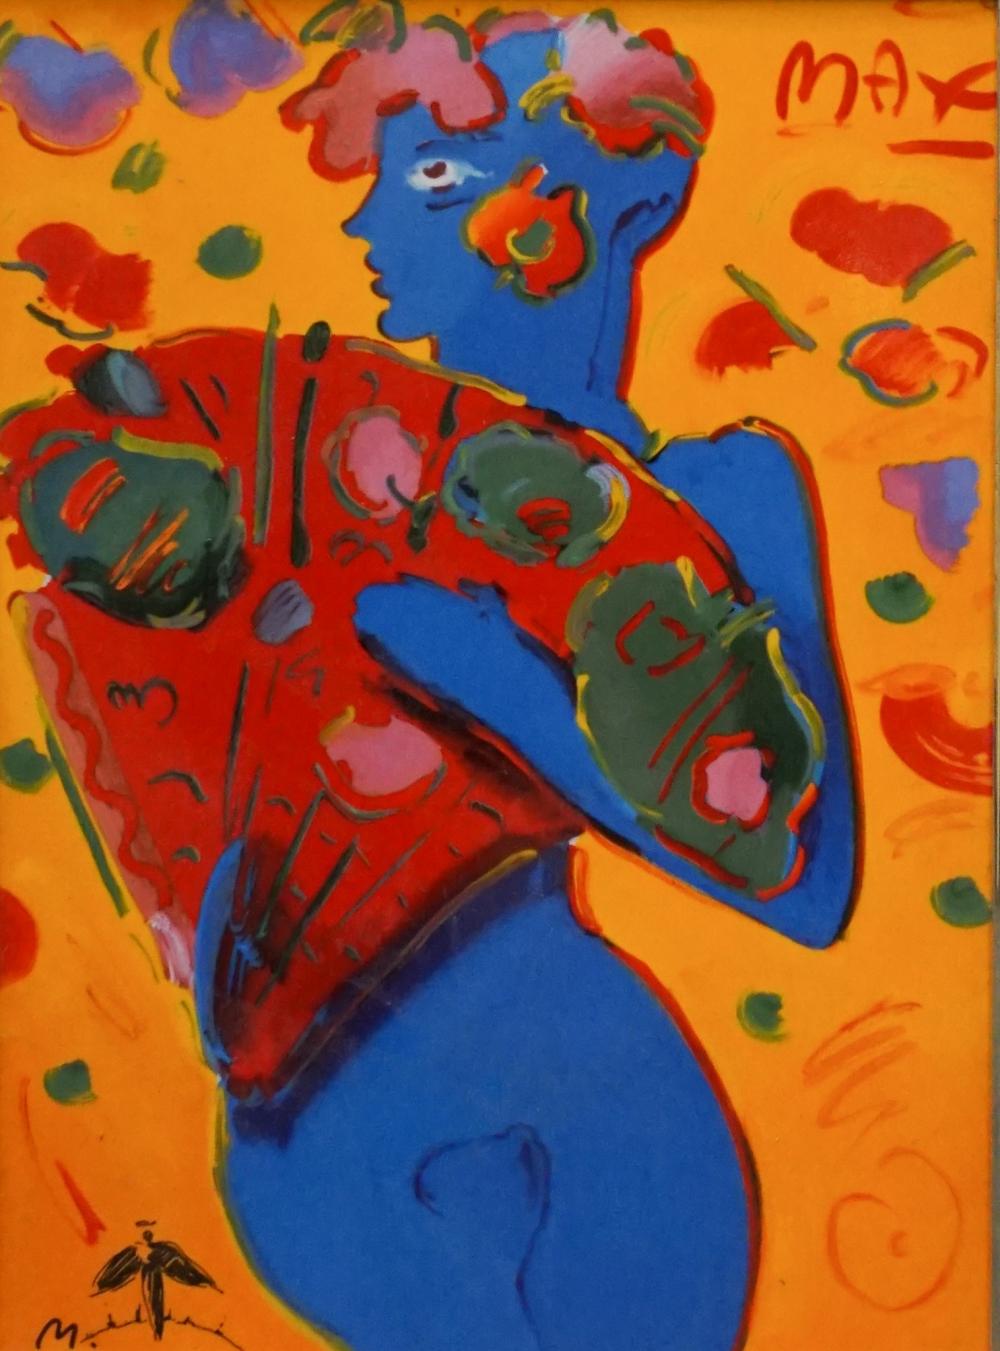 AFTER PETER MAX FAN DANCER PRINTED 2e4f04